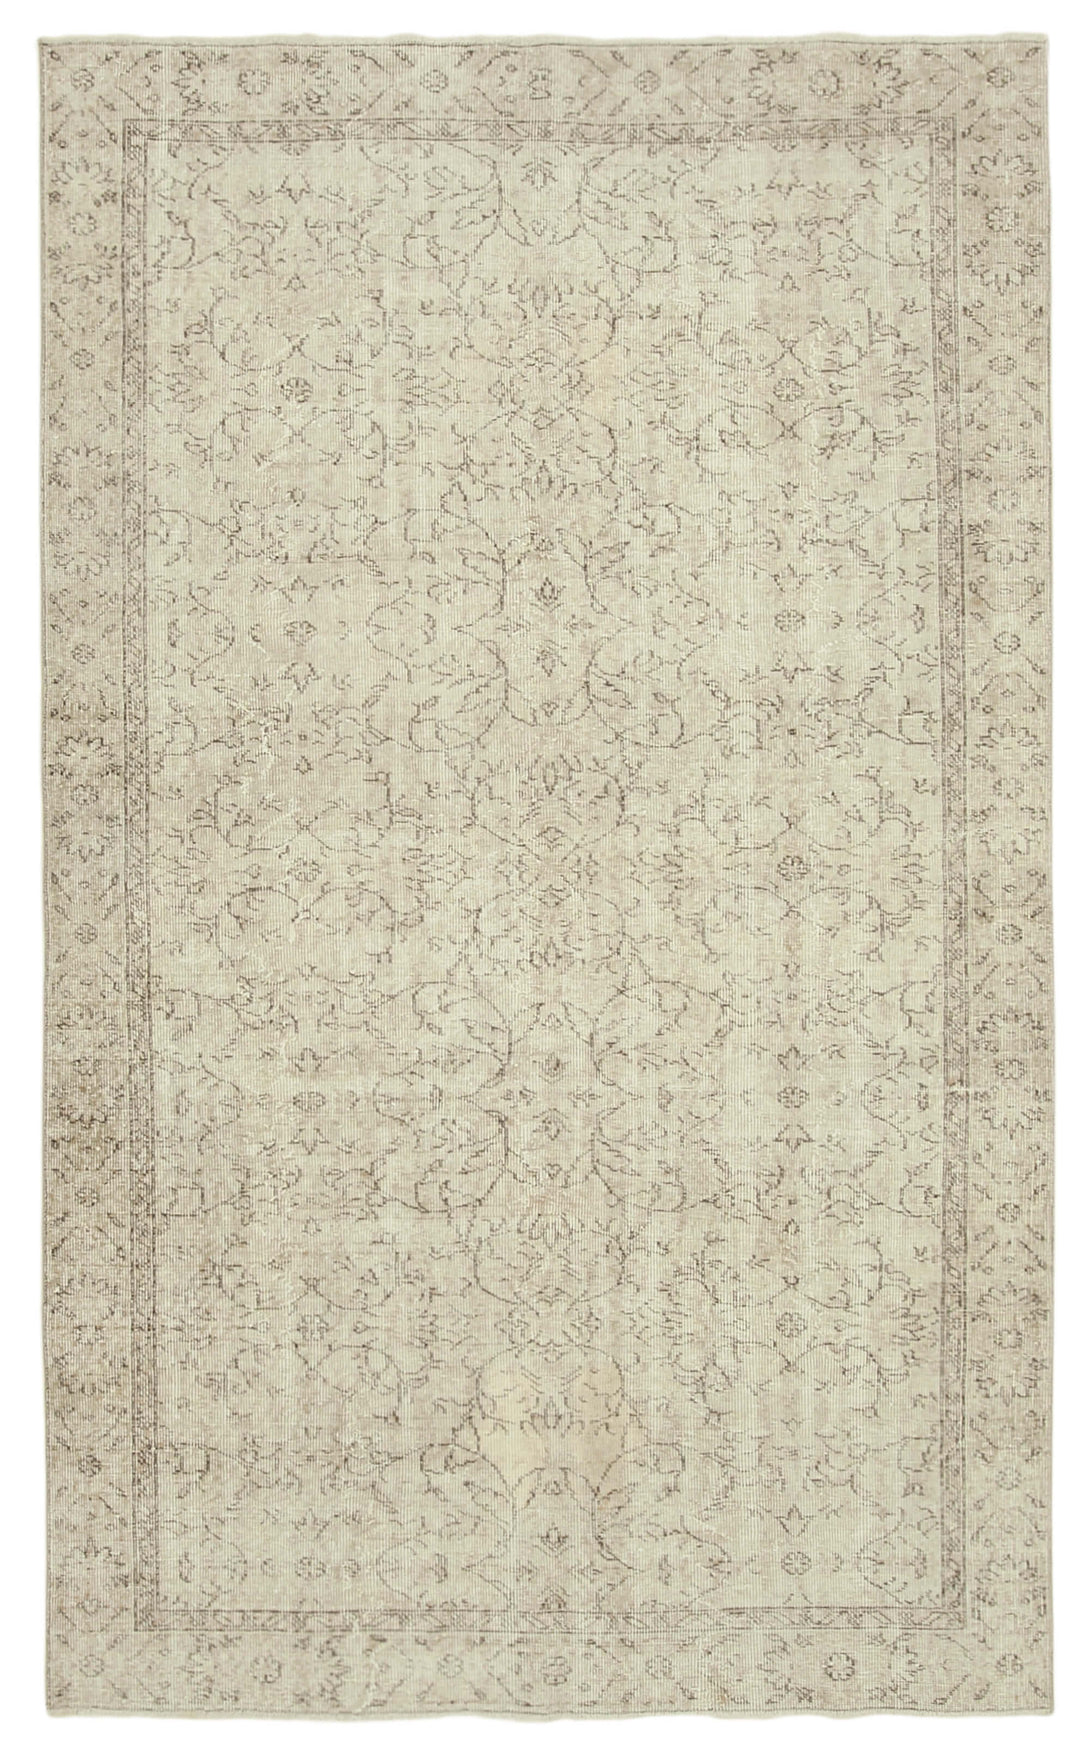 Handmade White Wash Area Rug > Design# OL-AC-39035 > Size: 5'-6" x 9'-3", Carpet Culture Rugs, Handmade Rugs, NYC Rugs, New Rugs, Shop Rugs, Rug Store, Outlet Rugs, SoHo Rugs, Rugs in USA